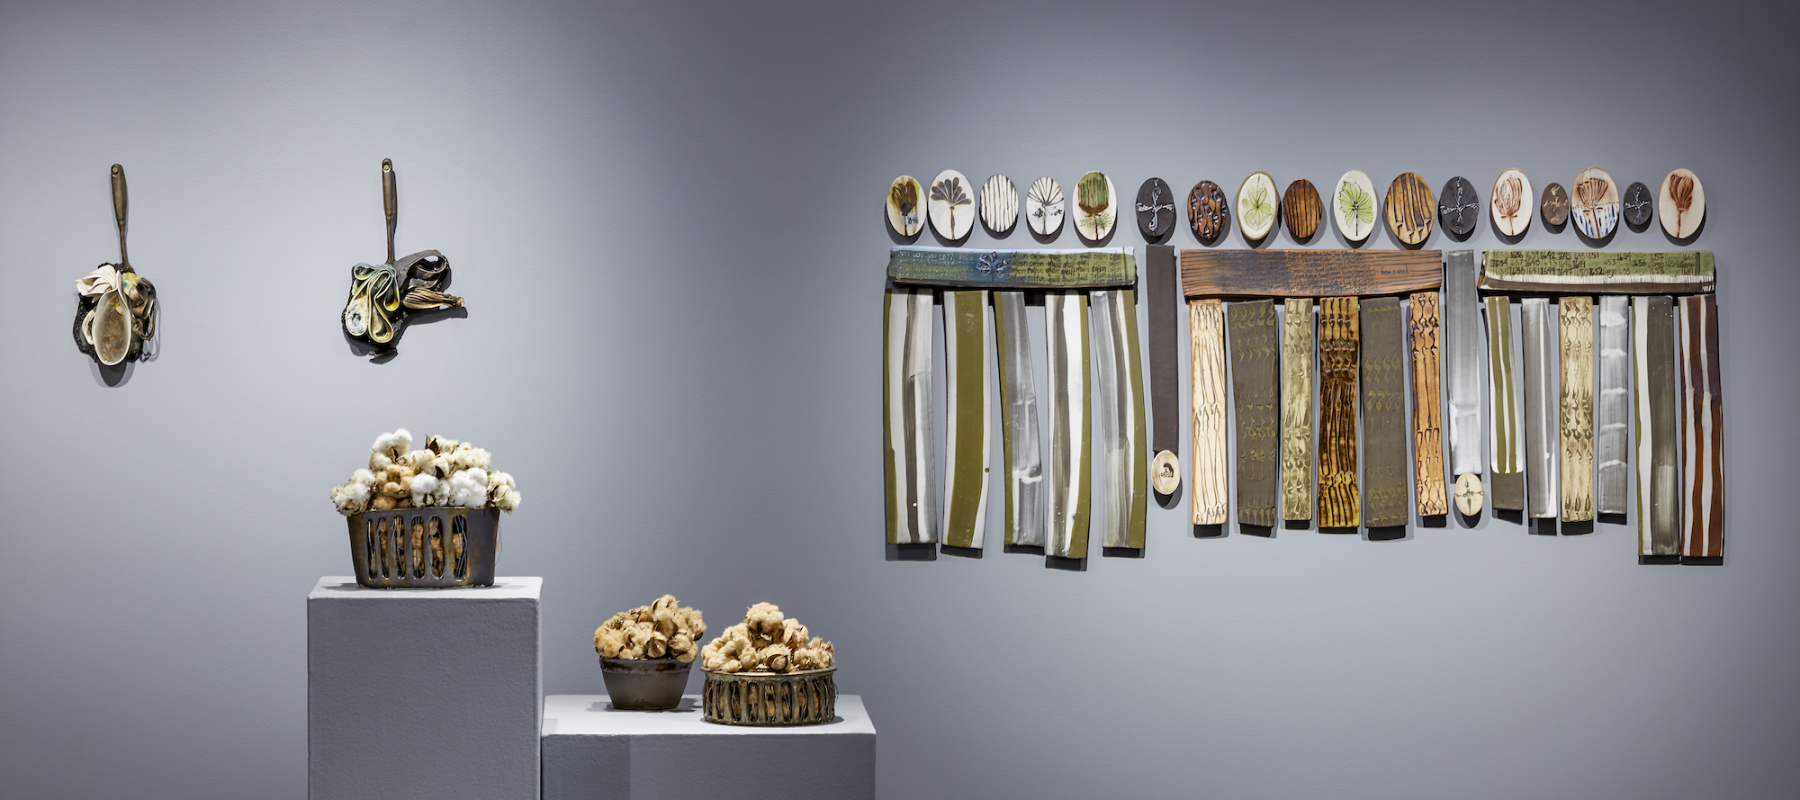 Ceramic pieces by Chotsani Elaine Dean hang on a gallery wall and sit on two pedestals.